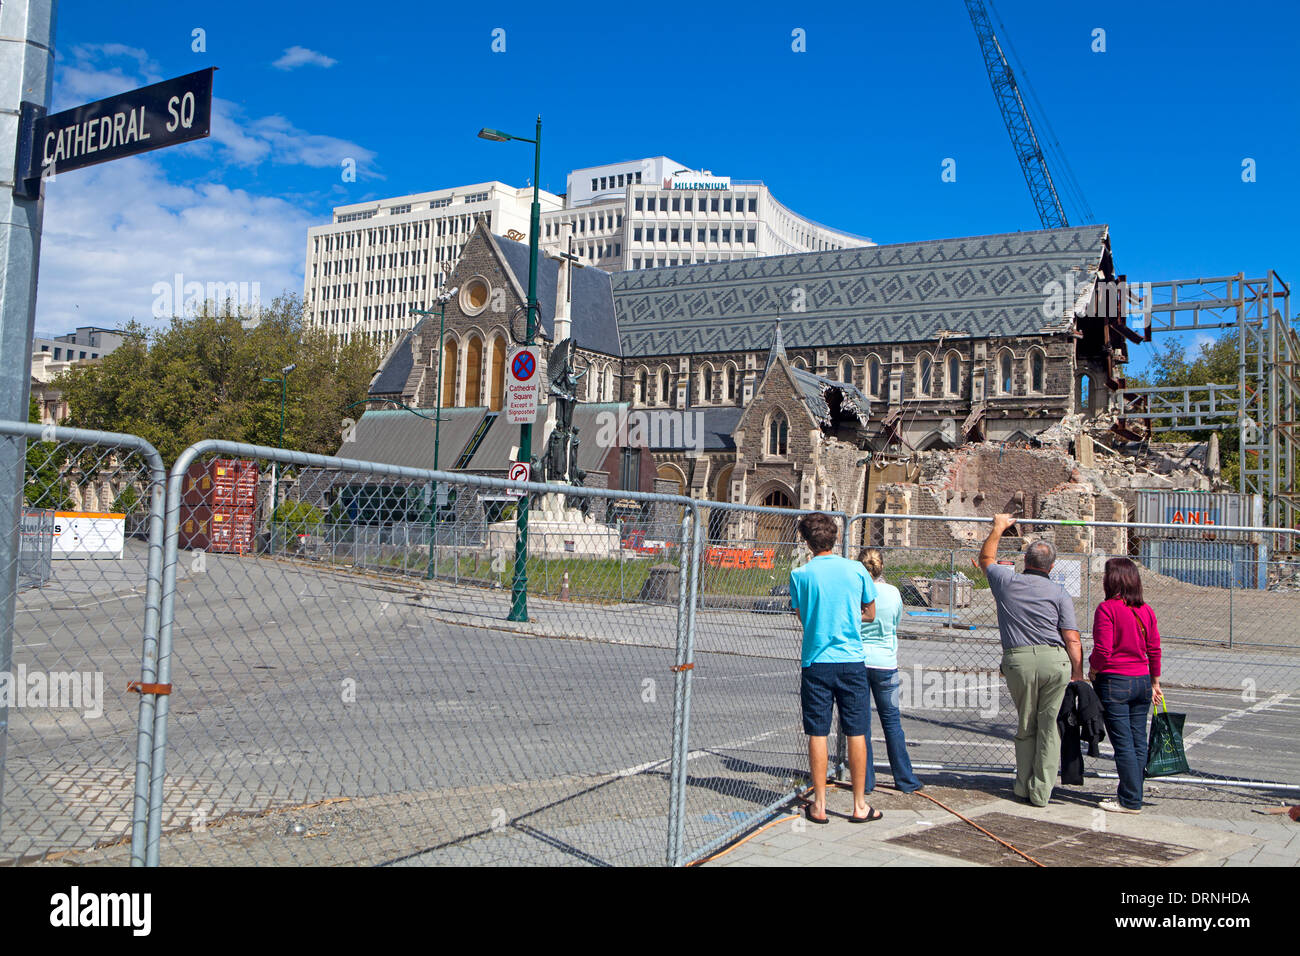 The earthquake-damaged cathedral in Christchurch Stock Photo